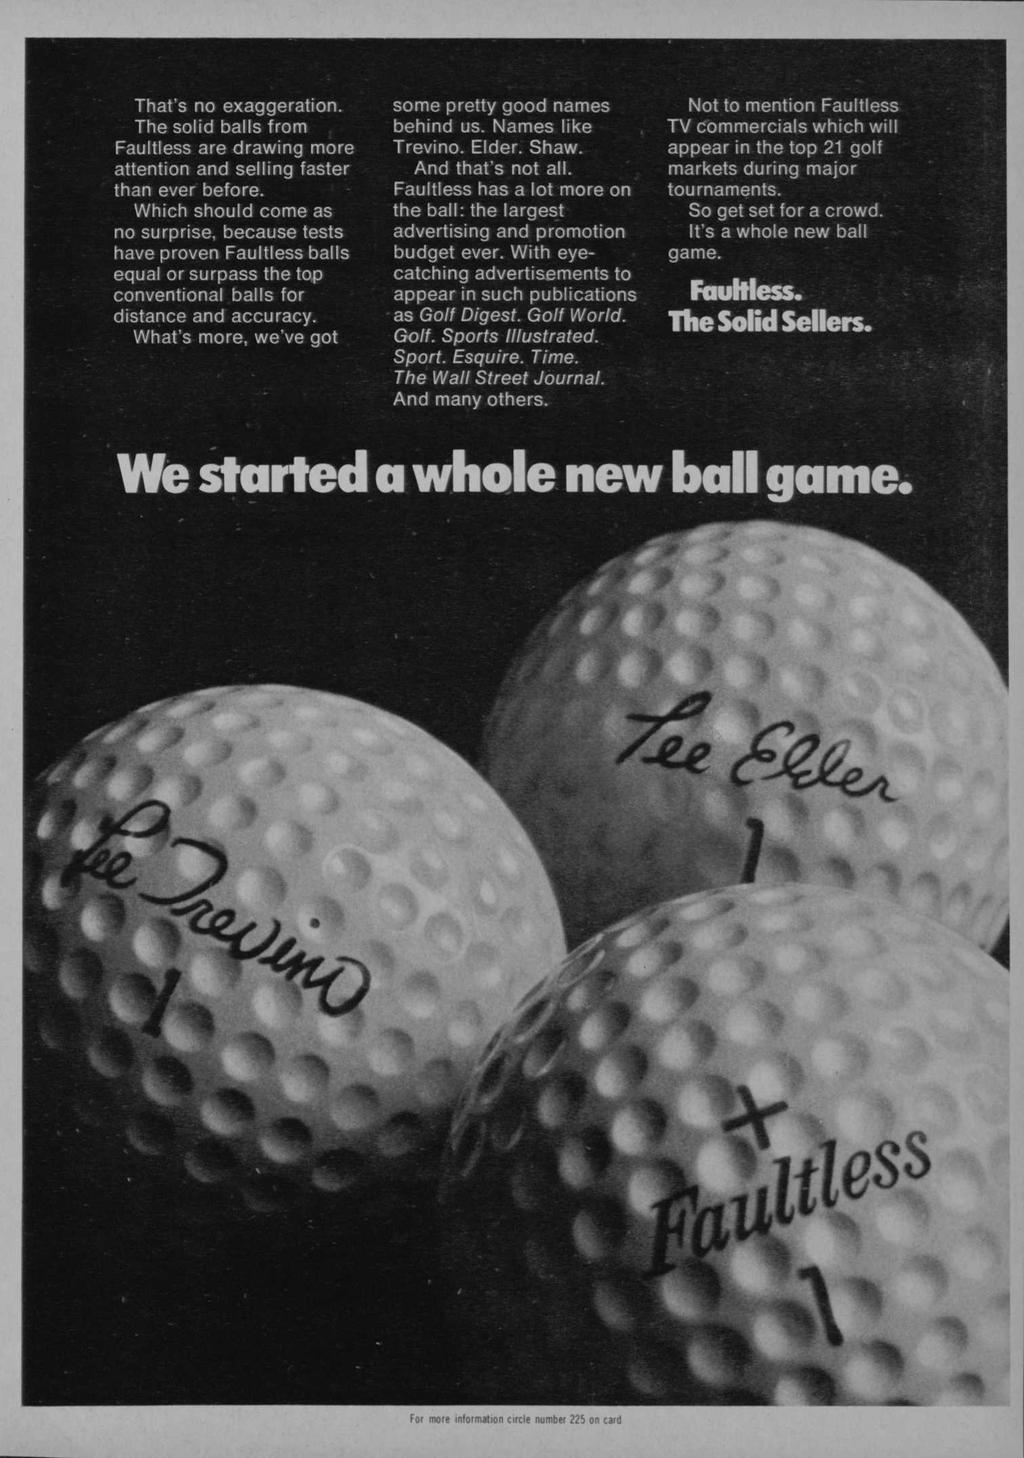 That's no exaggeration. The solid balls from Faultless are drawing more attention and selling faster than ever before.